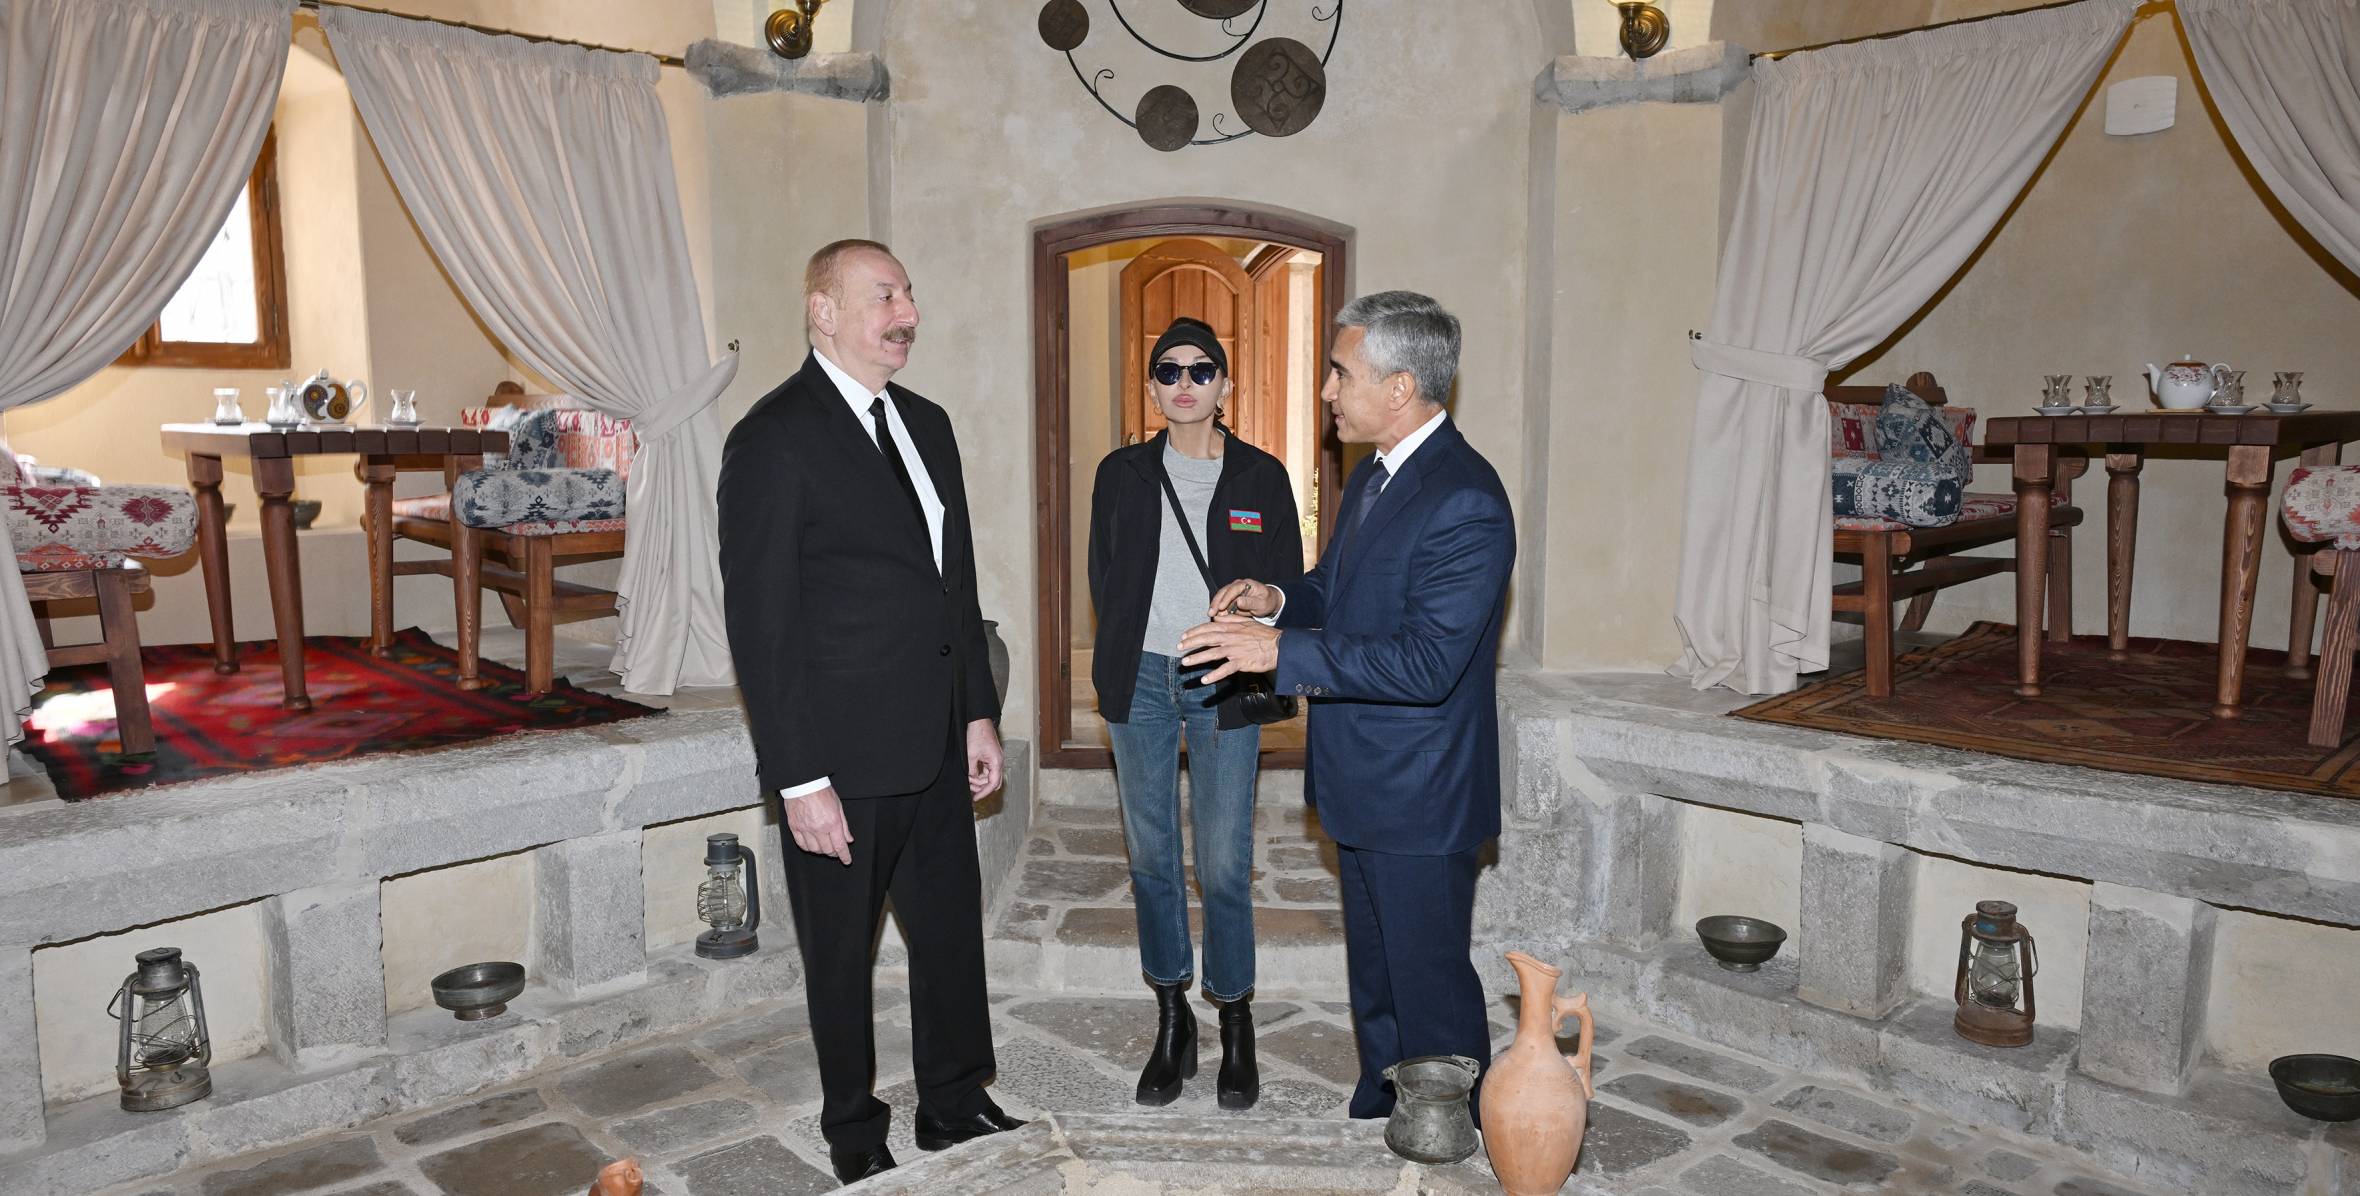 Ilham Aliyev and First Lady Mehriban Aliyeva attended the opening of the Shirin Su Bath in Shusha after its restoration